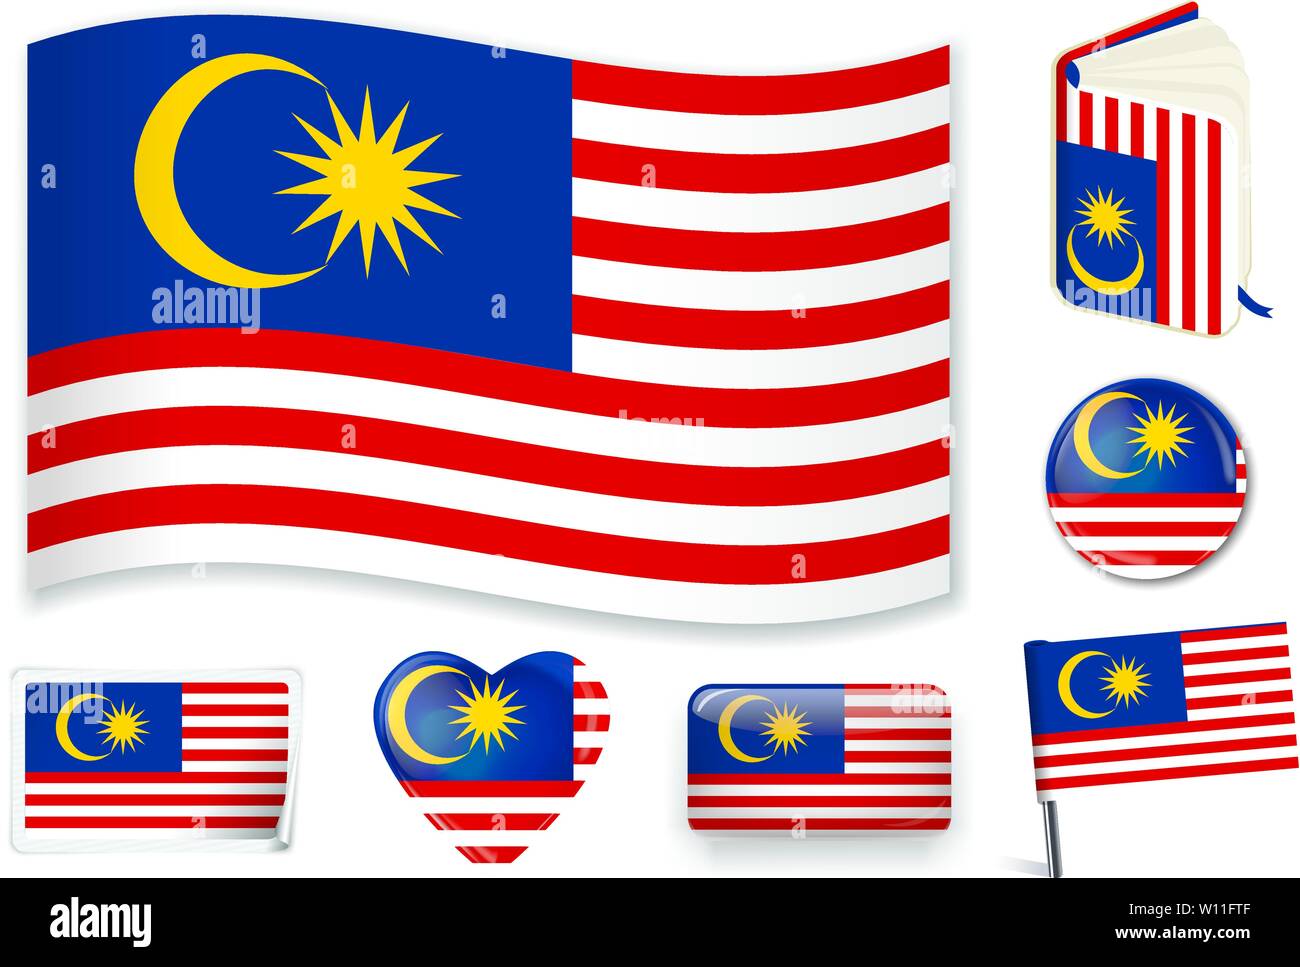 Malaysia. Malaysian national flag. Vector illustration. 3 layers. Shadows, flat flag, lights and shadows. Collection of 220 world flags. Accurate colors. Easy changes. Stock Vector